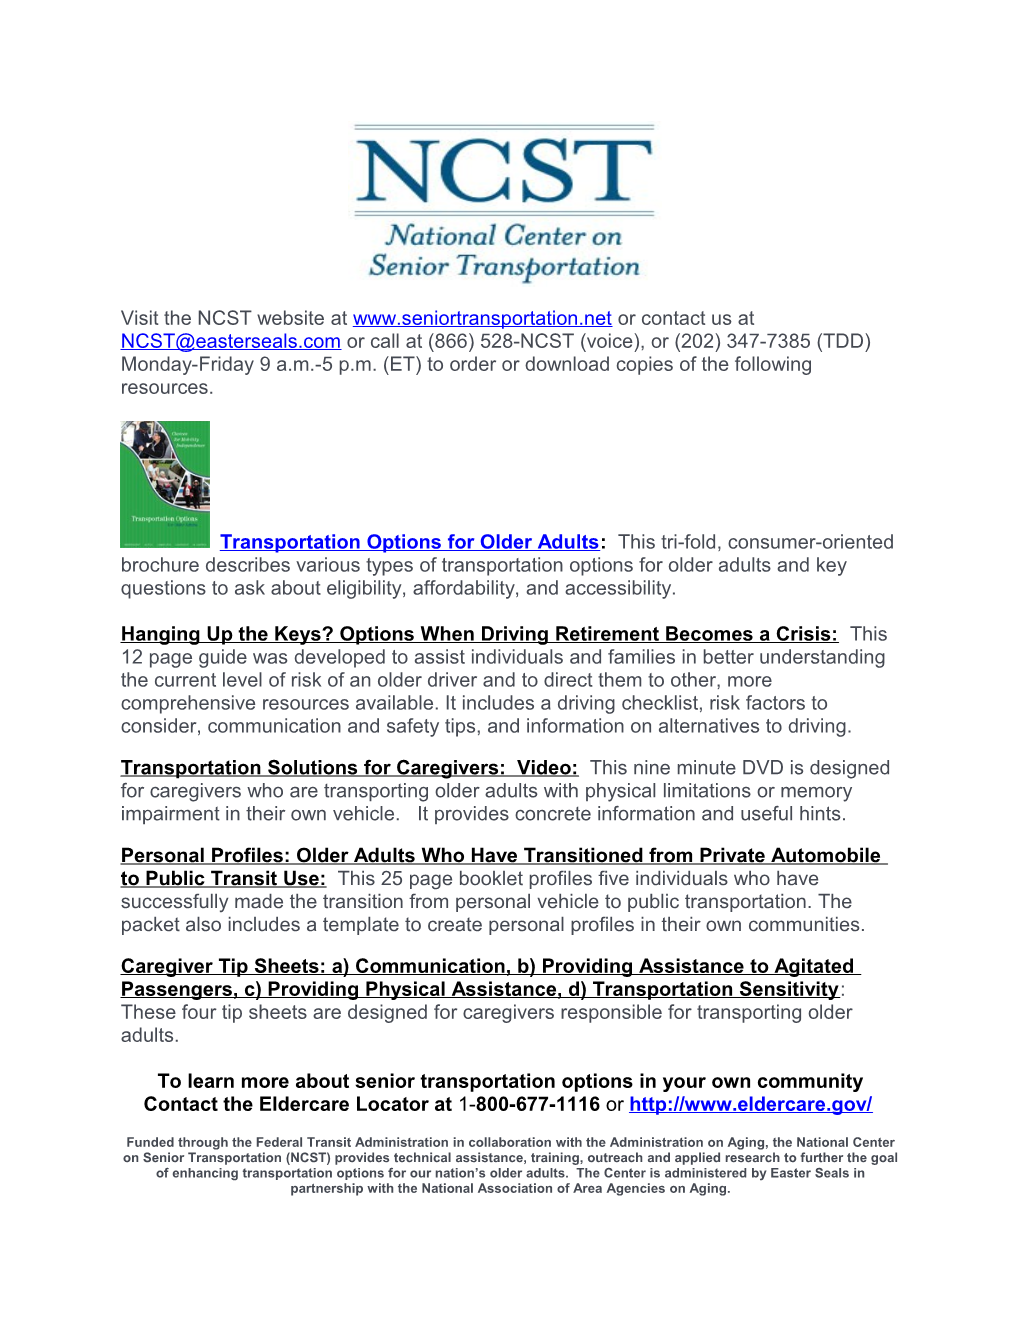 Visit the NCST Website at Or Contact Us at Or Call at (866) 528-NCST (Voice), Or (202)